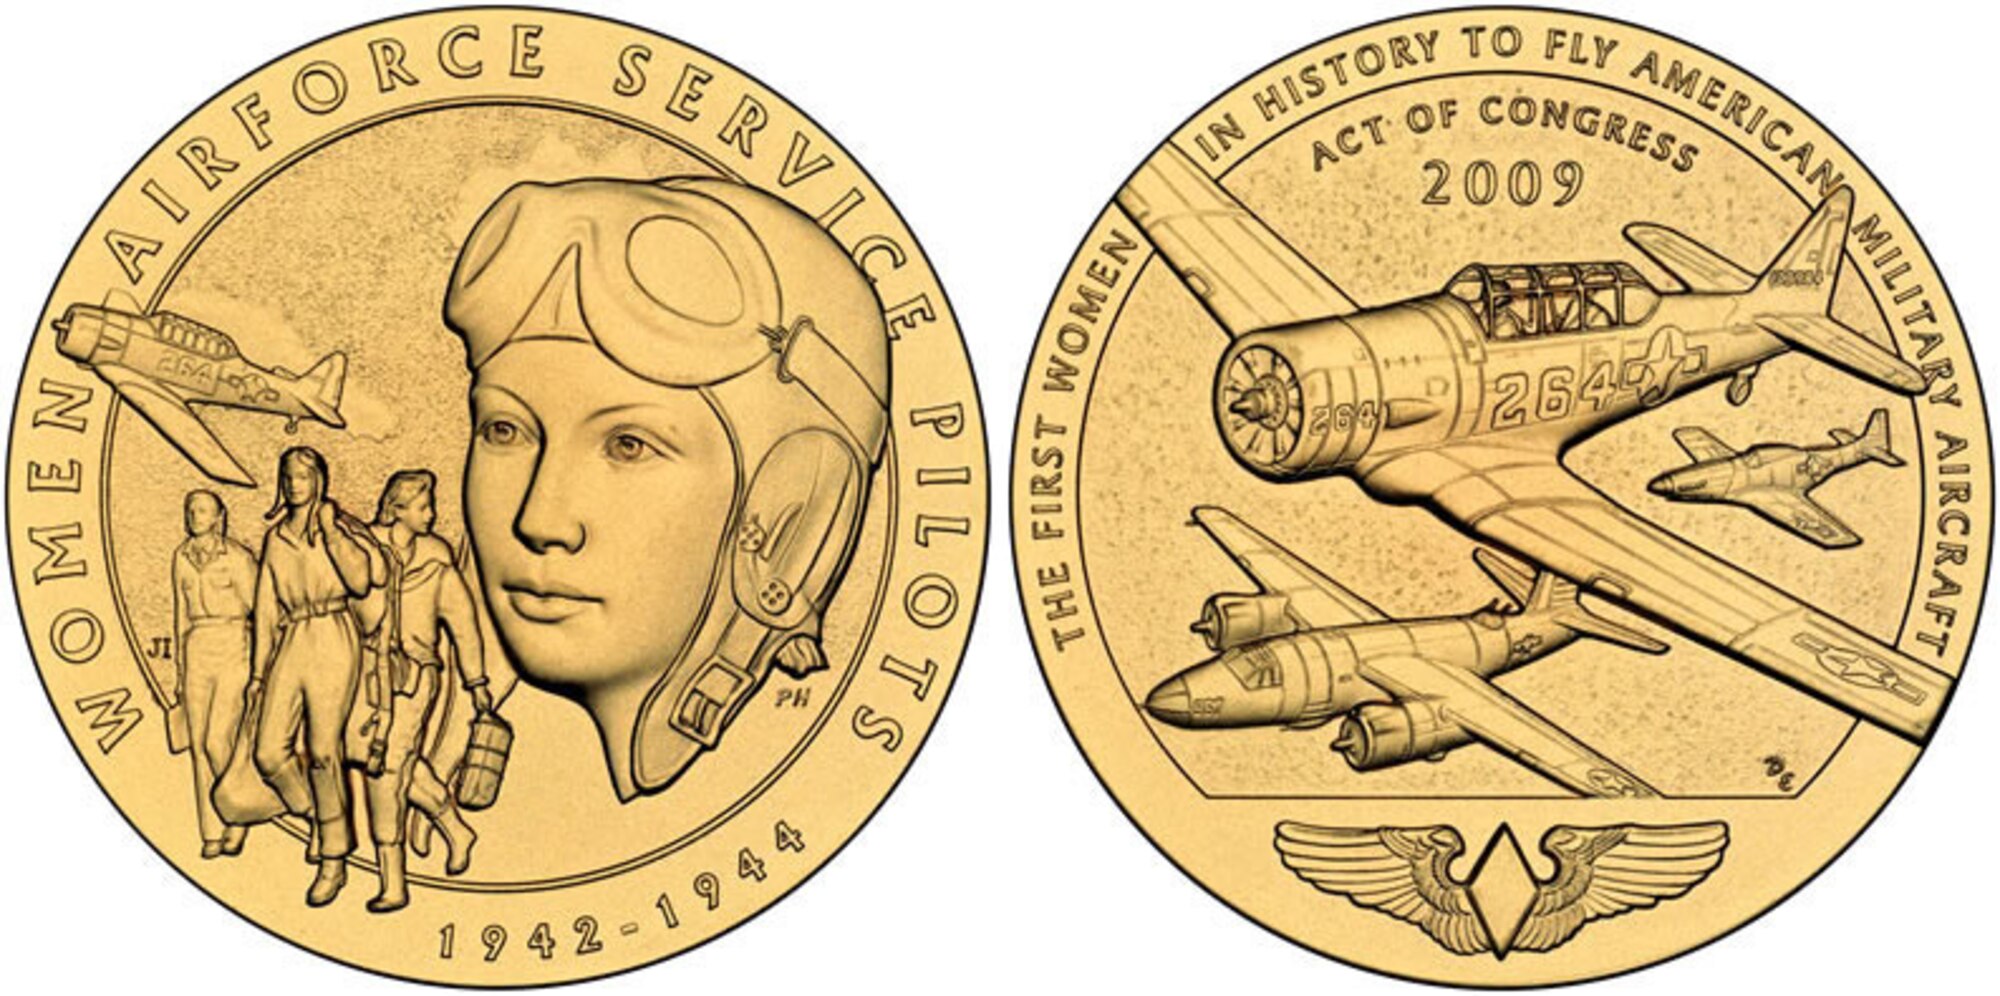 The Congressional Gold Medal awarded to Women Airforce Service Pilots is pictured here. The front shows three WASP in uniforms with an AT-6 in the background. On the reverse side, the design features three of the aircraft WASPs flew during their training: the AT-6, B-26 and P-51. (Photo U.S. Mint)